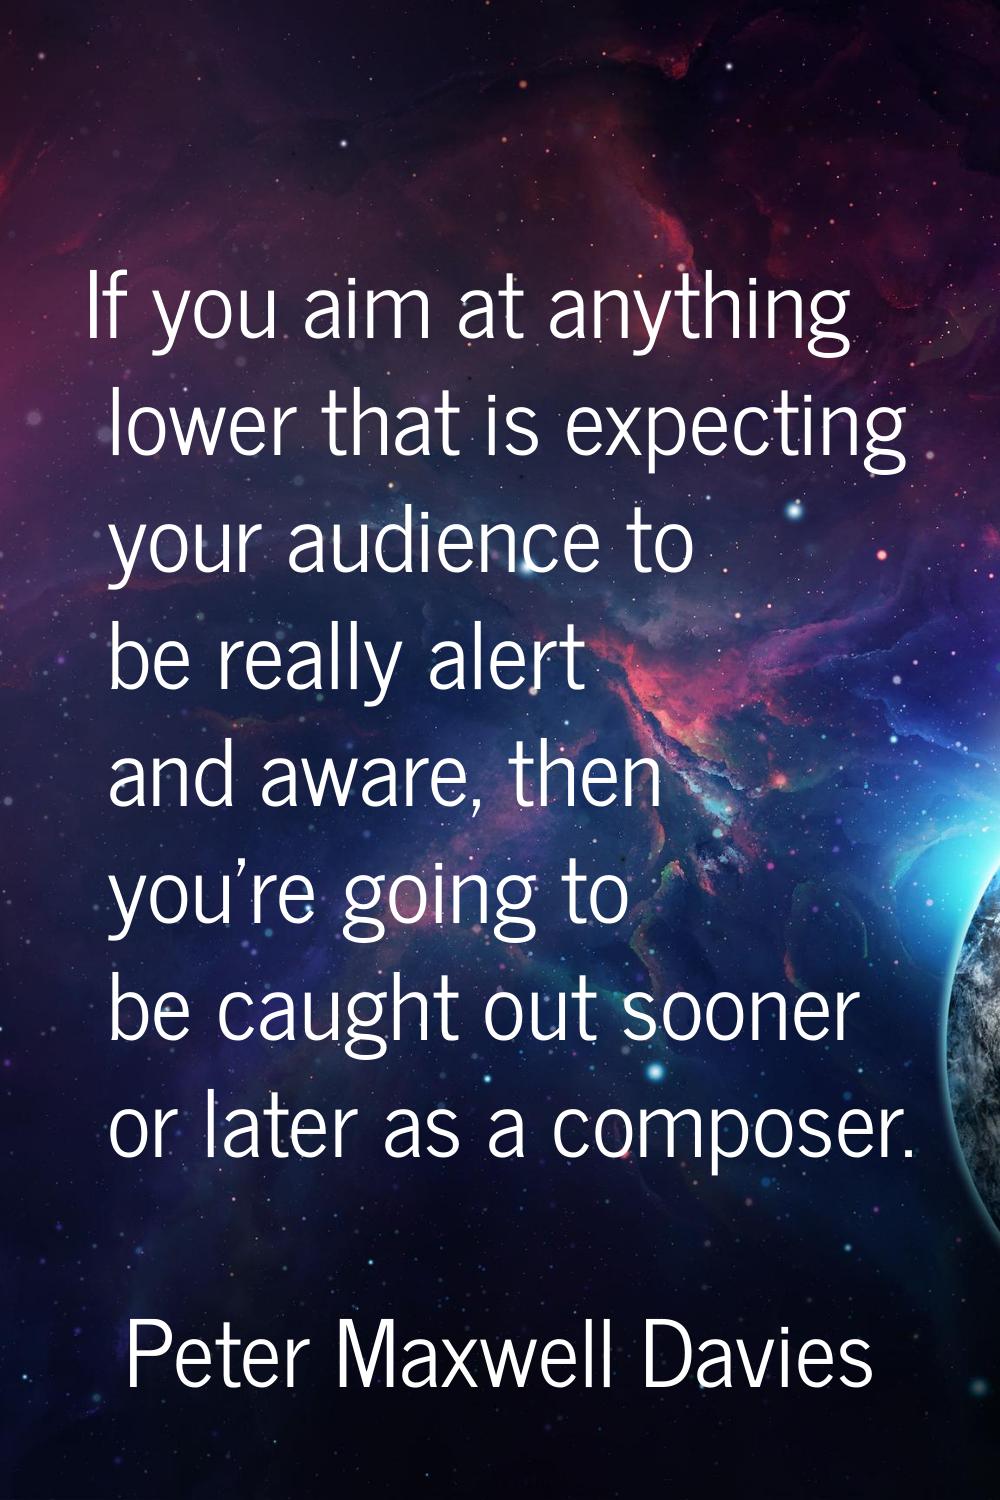 If you aim at anything lower that is expecting your audience to be really alert and aware, then you